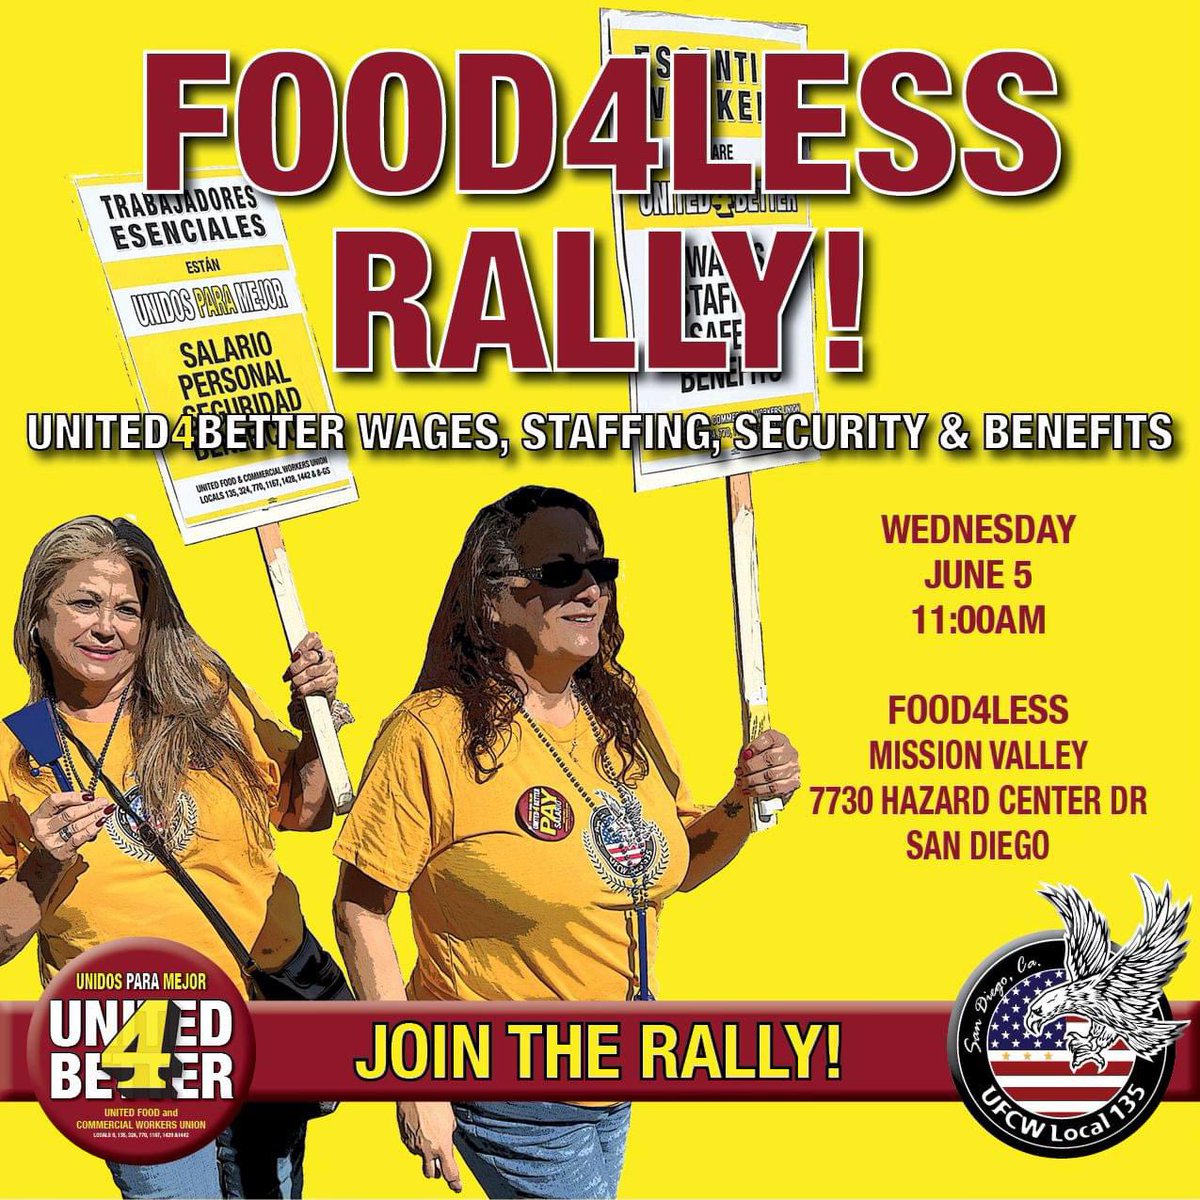 Join us for a rally at Food4Less in Mission Valley on June 5 at 11am!

With the Food4Less contract expiring on June 8, we will be holding this action to help highlight our fight for a new one.

Show your solidarity by standing #United4Better wages, staffing, security & benefits!